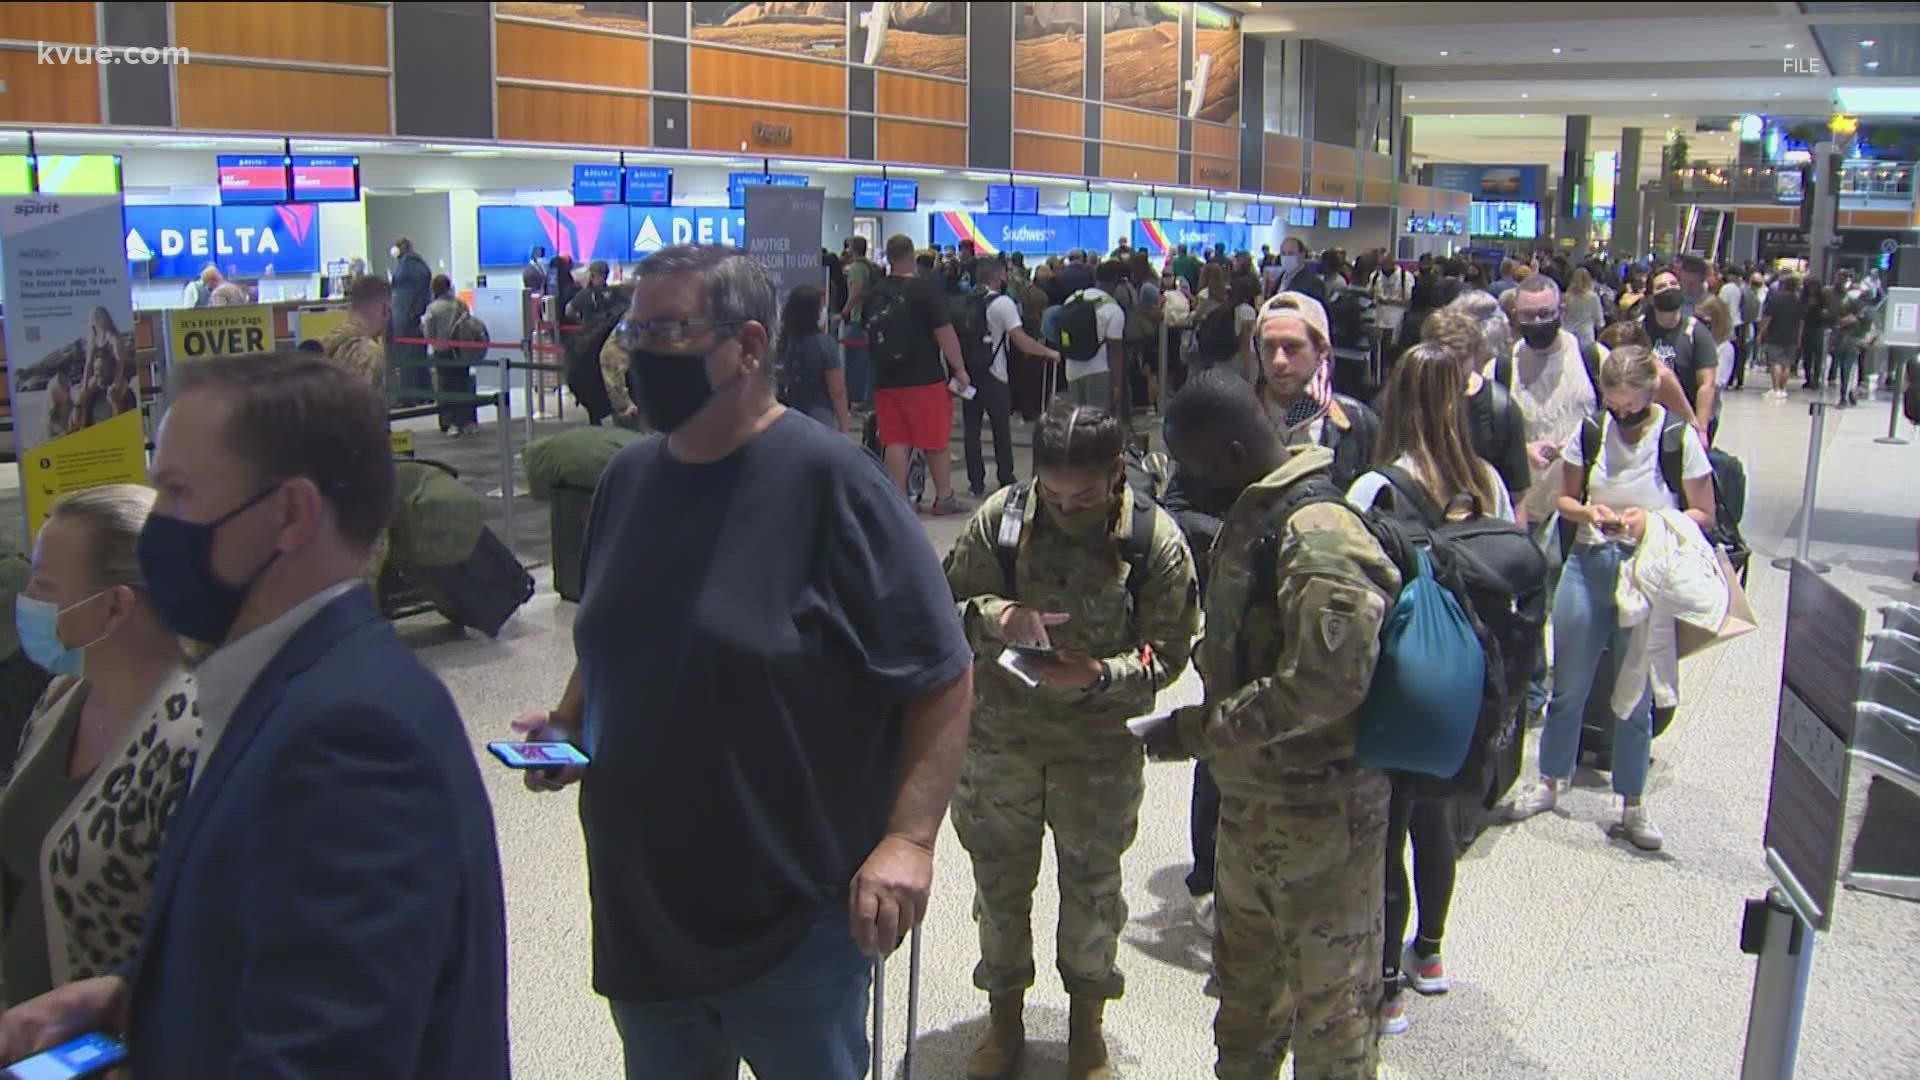 Expansion plans are taking off at Austin's airport as travel numbers increase to pre-pandemic levels. But it will be a while before travelers see all the changes.